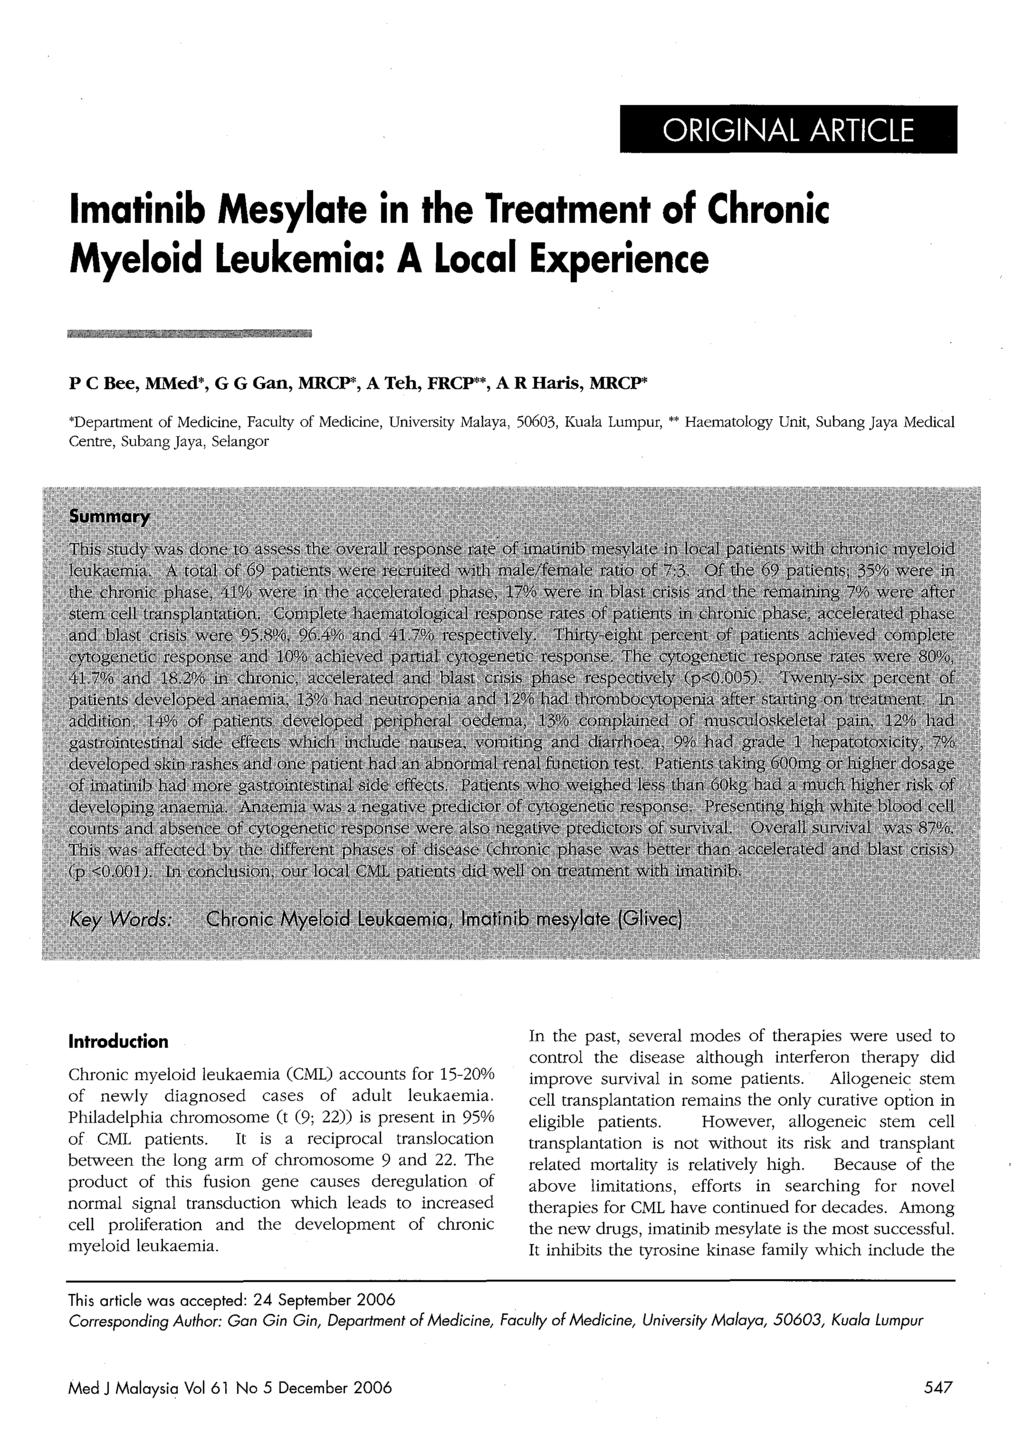 ORIGINAL ARTICLE Imatinib Mesylate in the Treatment of Chronic Myeloid Leukemia: A Local Experience PC Bee, MMed*, G G Gan, MRCP*, A Teh, FRCP**, A R Haris, MRCP* *Department of Medicine, Faculty of